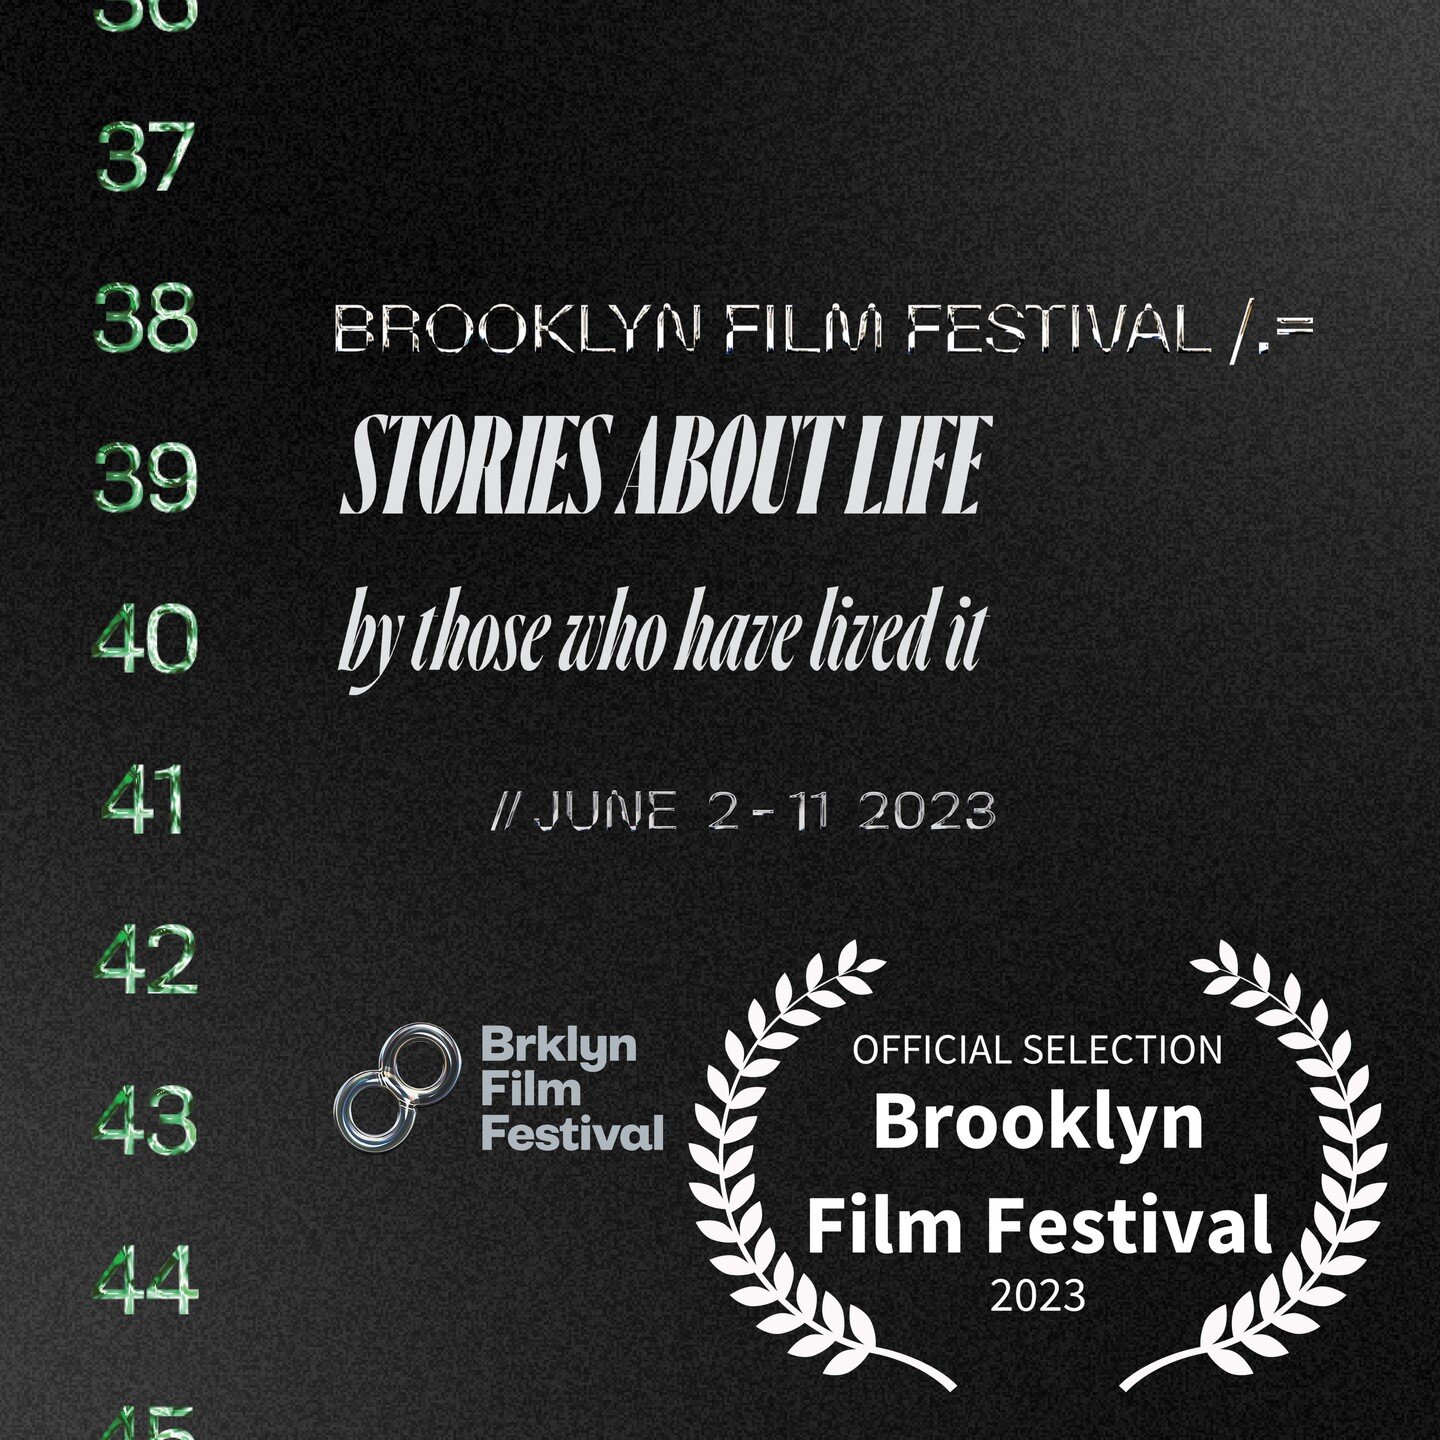 🎥 Exciting News! 🎉 I am thrilled to announce that our film has been officially selected for the Brooklyn Film Festival! 🌟

🎞️ The Brooklyn Film Festival is renowned for its unwavering commitment to supporting emerging filmmakers with bold and dis